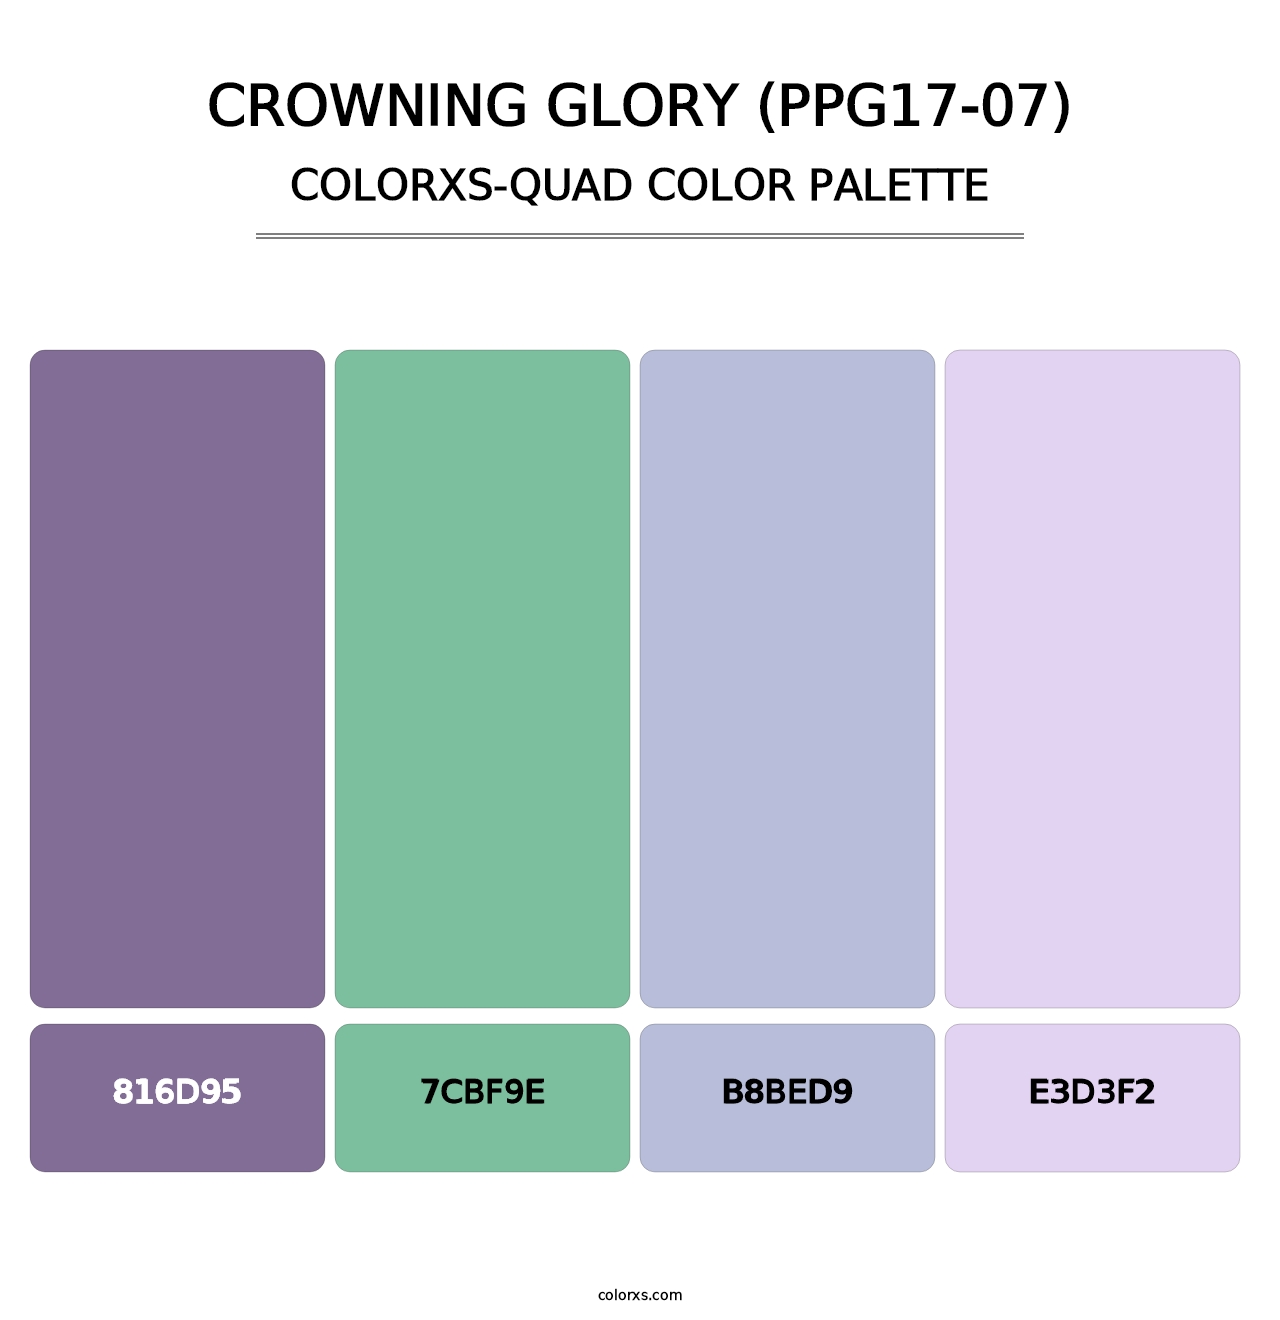 Crowning Glory (PPG17-07) - Colorxs Quad Palette